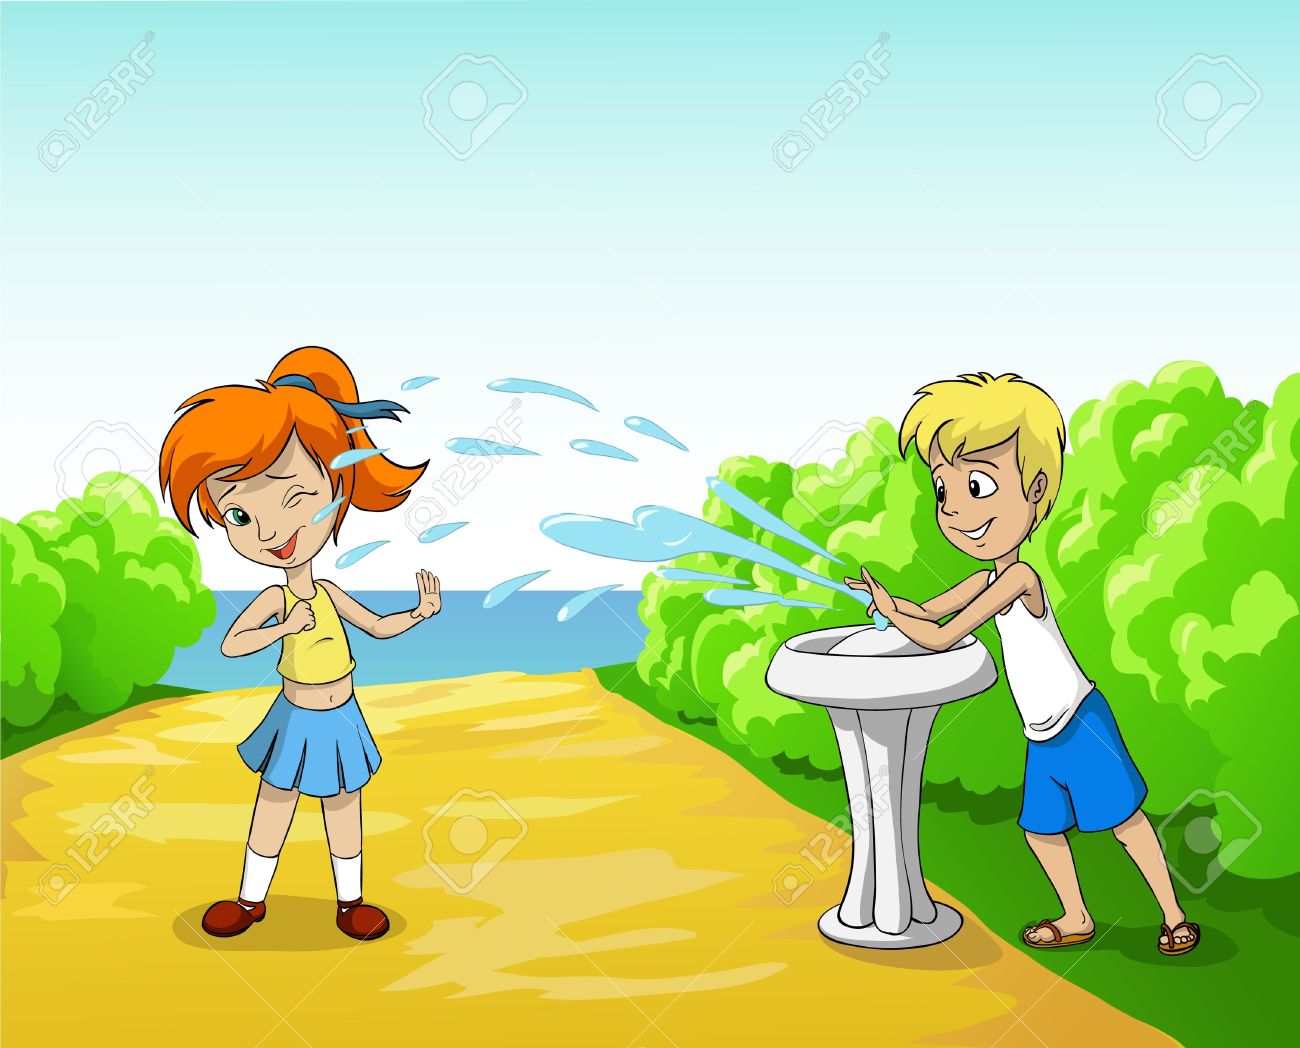 water play clipart - photo #25